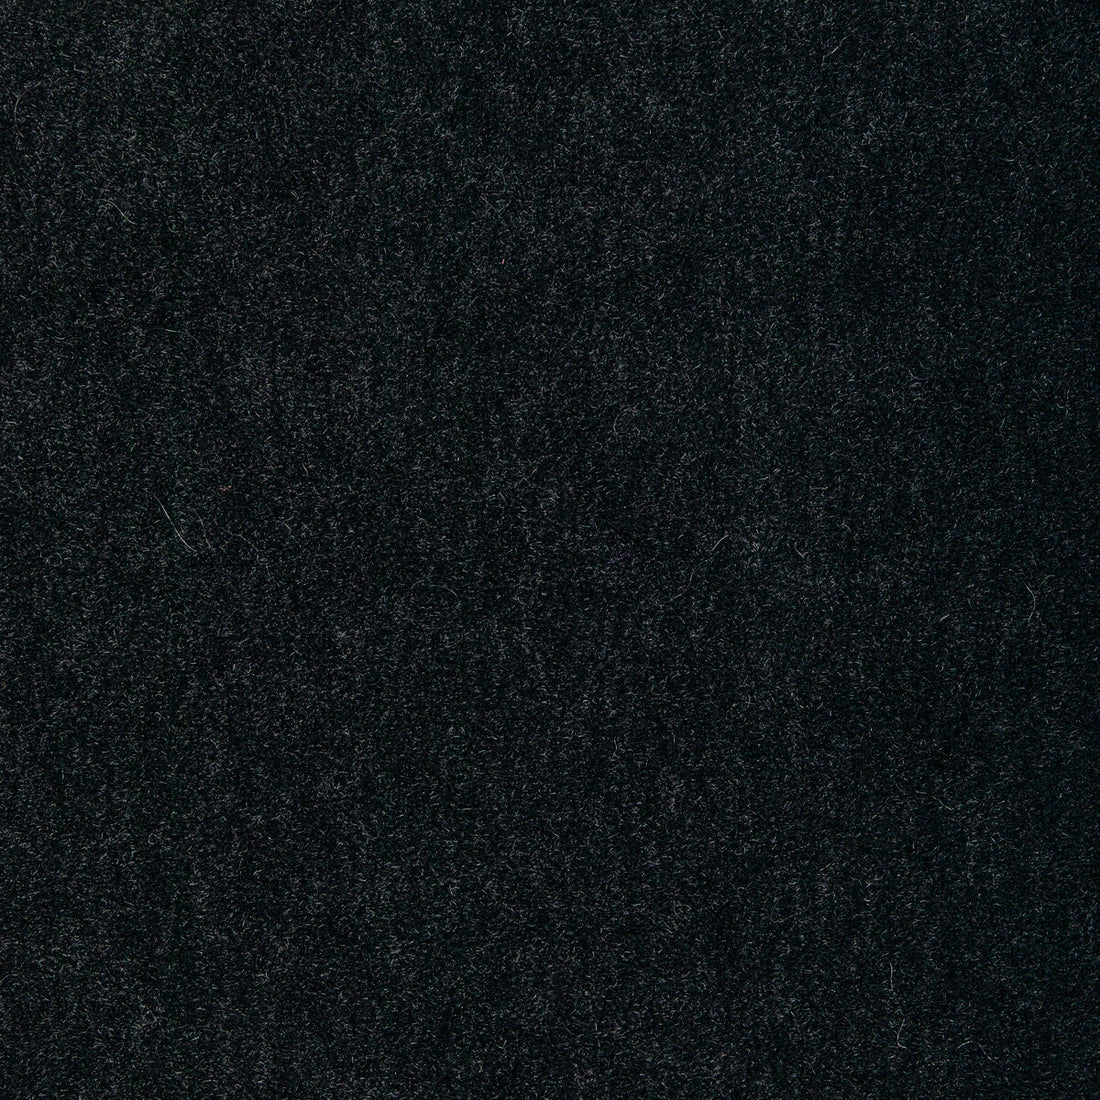 Chic Alpaca fabric in charcoal color - pattern 33837.8.0 - by Kravet Couture